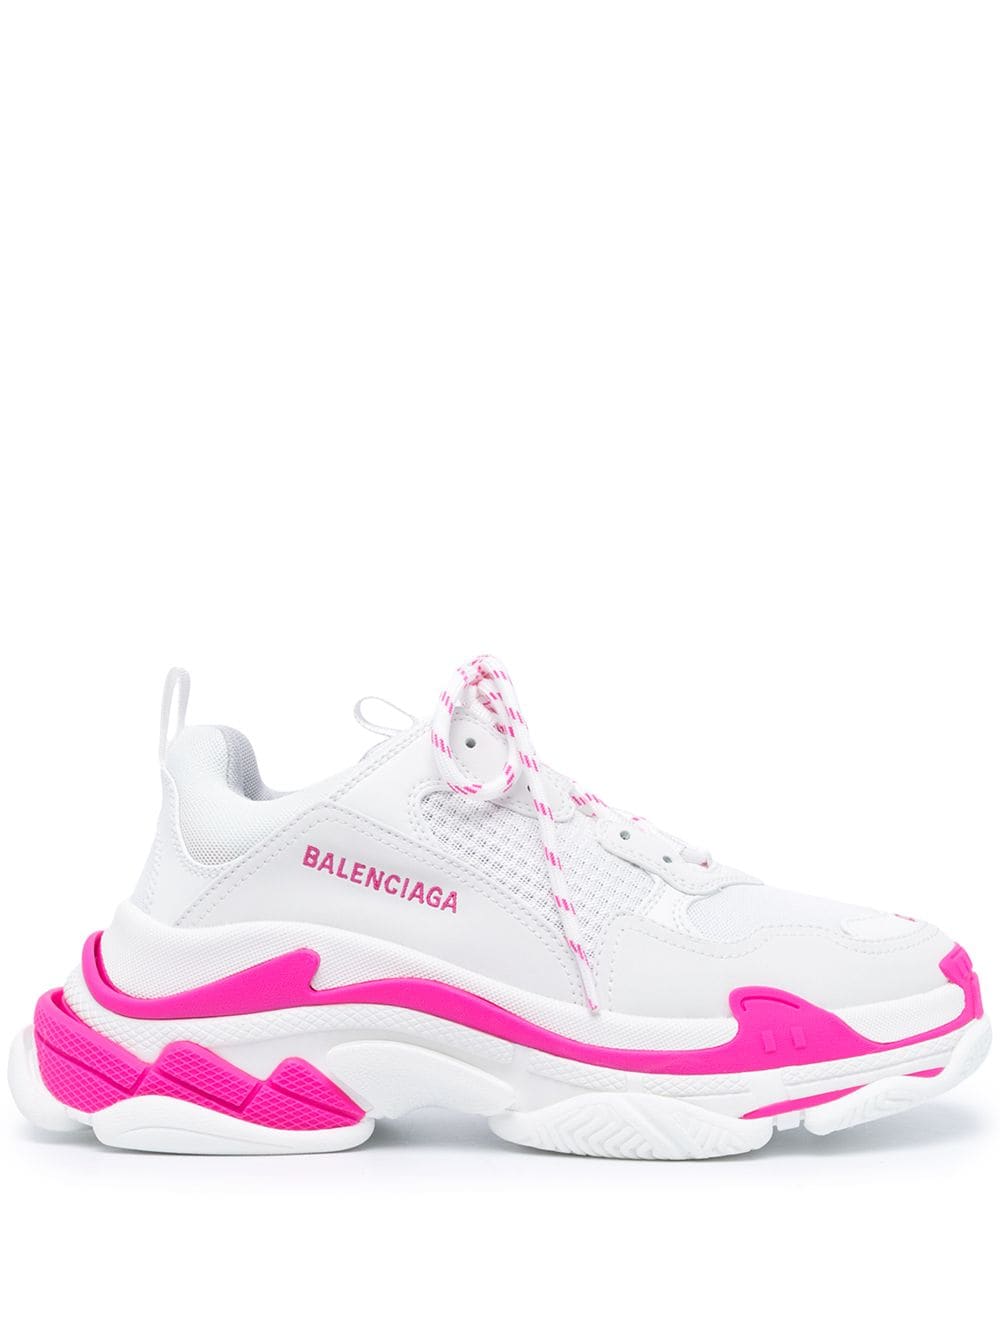 Balenciaga Woman White And Fluo Pink Triple S Sneakers